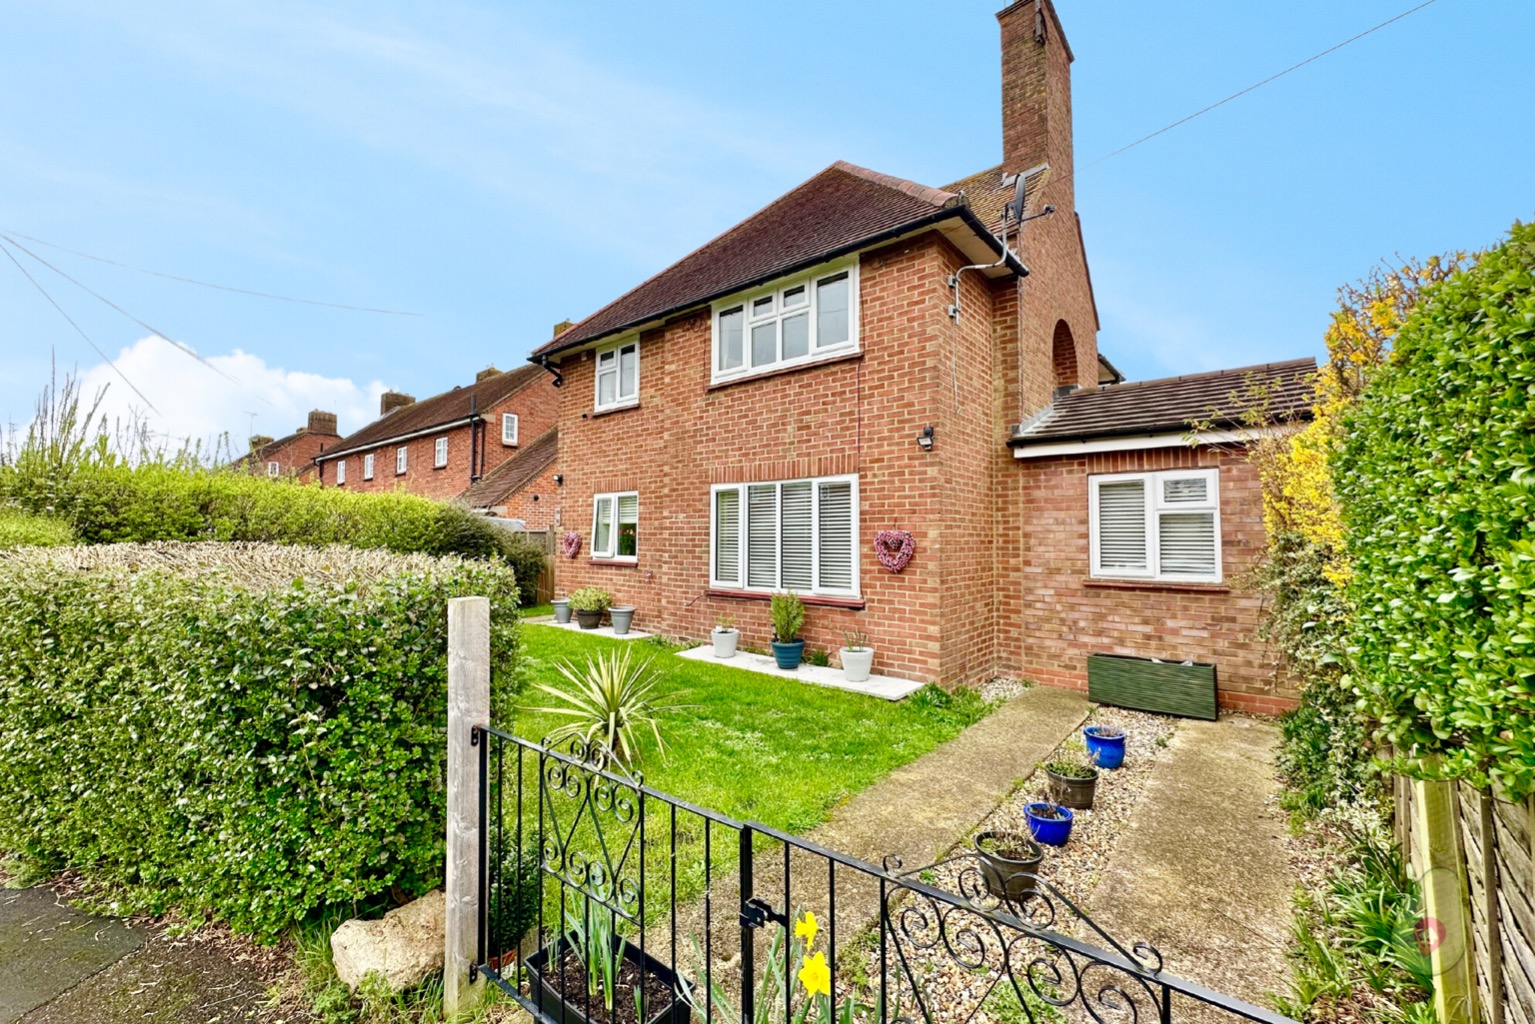 2 bed ground floor maisonette for sale in Wheatfields Road, Reading  - Property Image 1